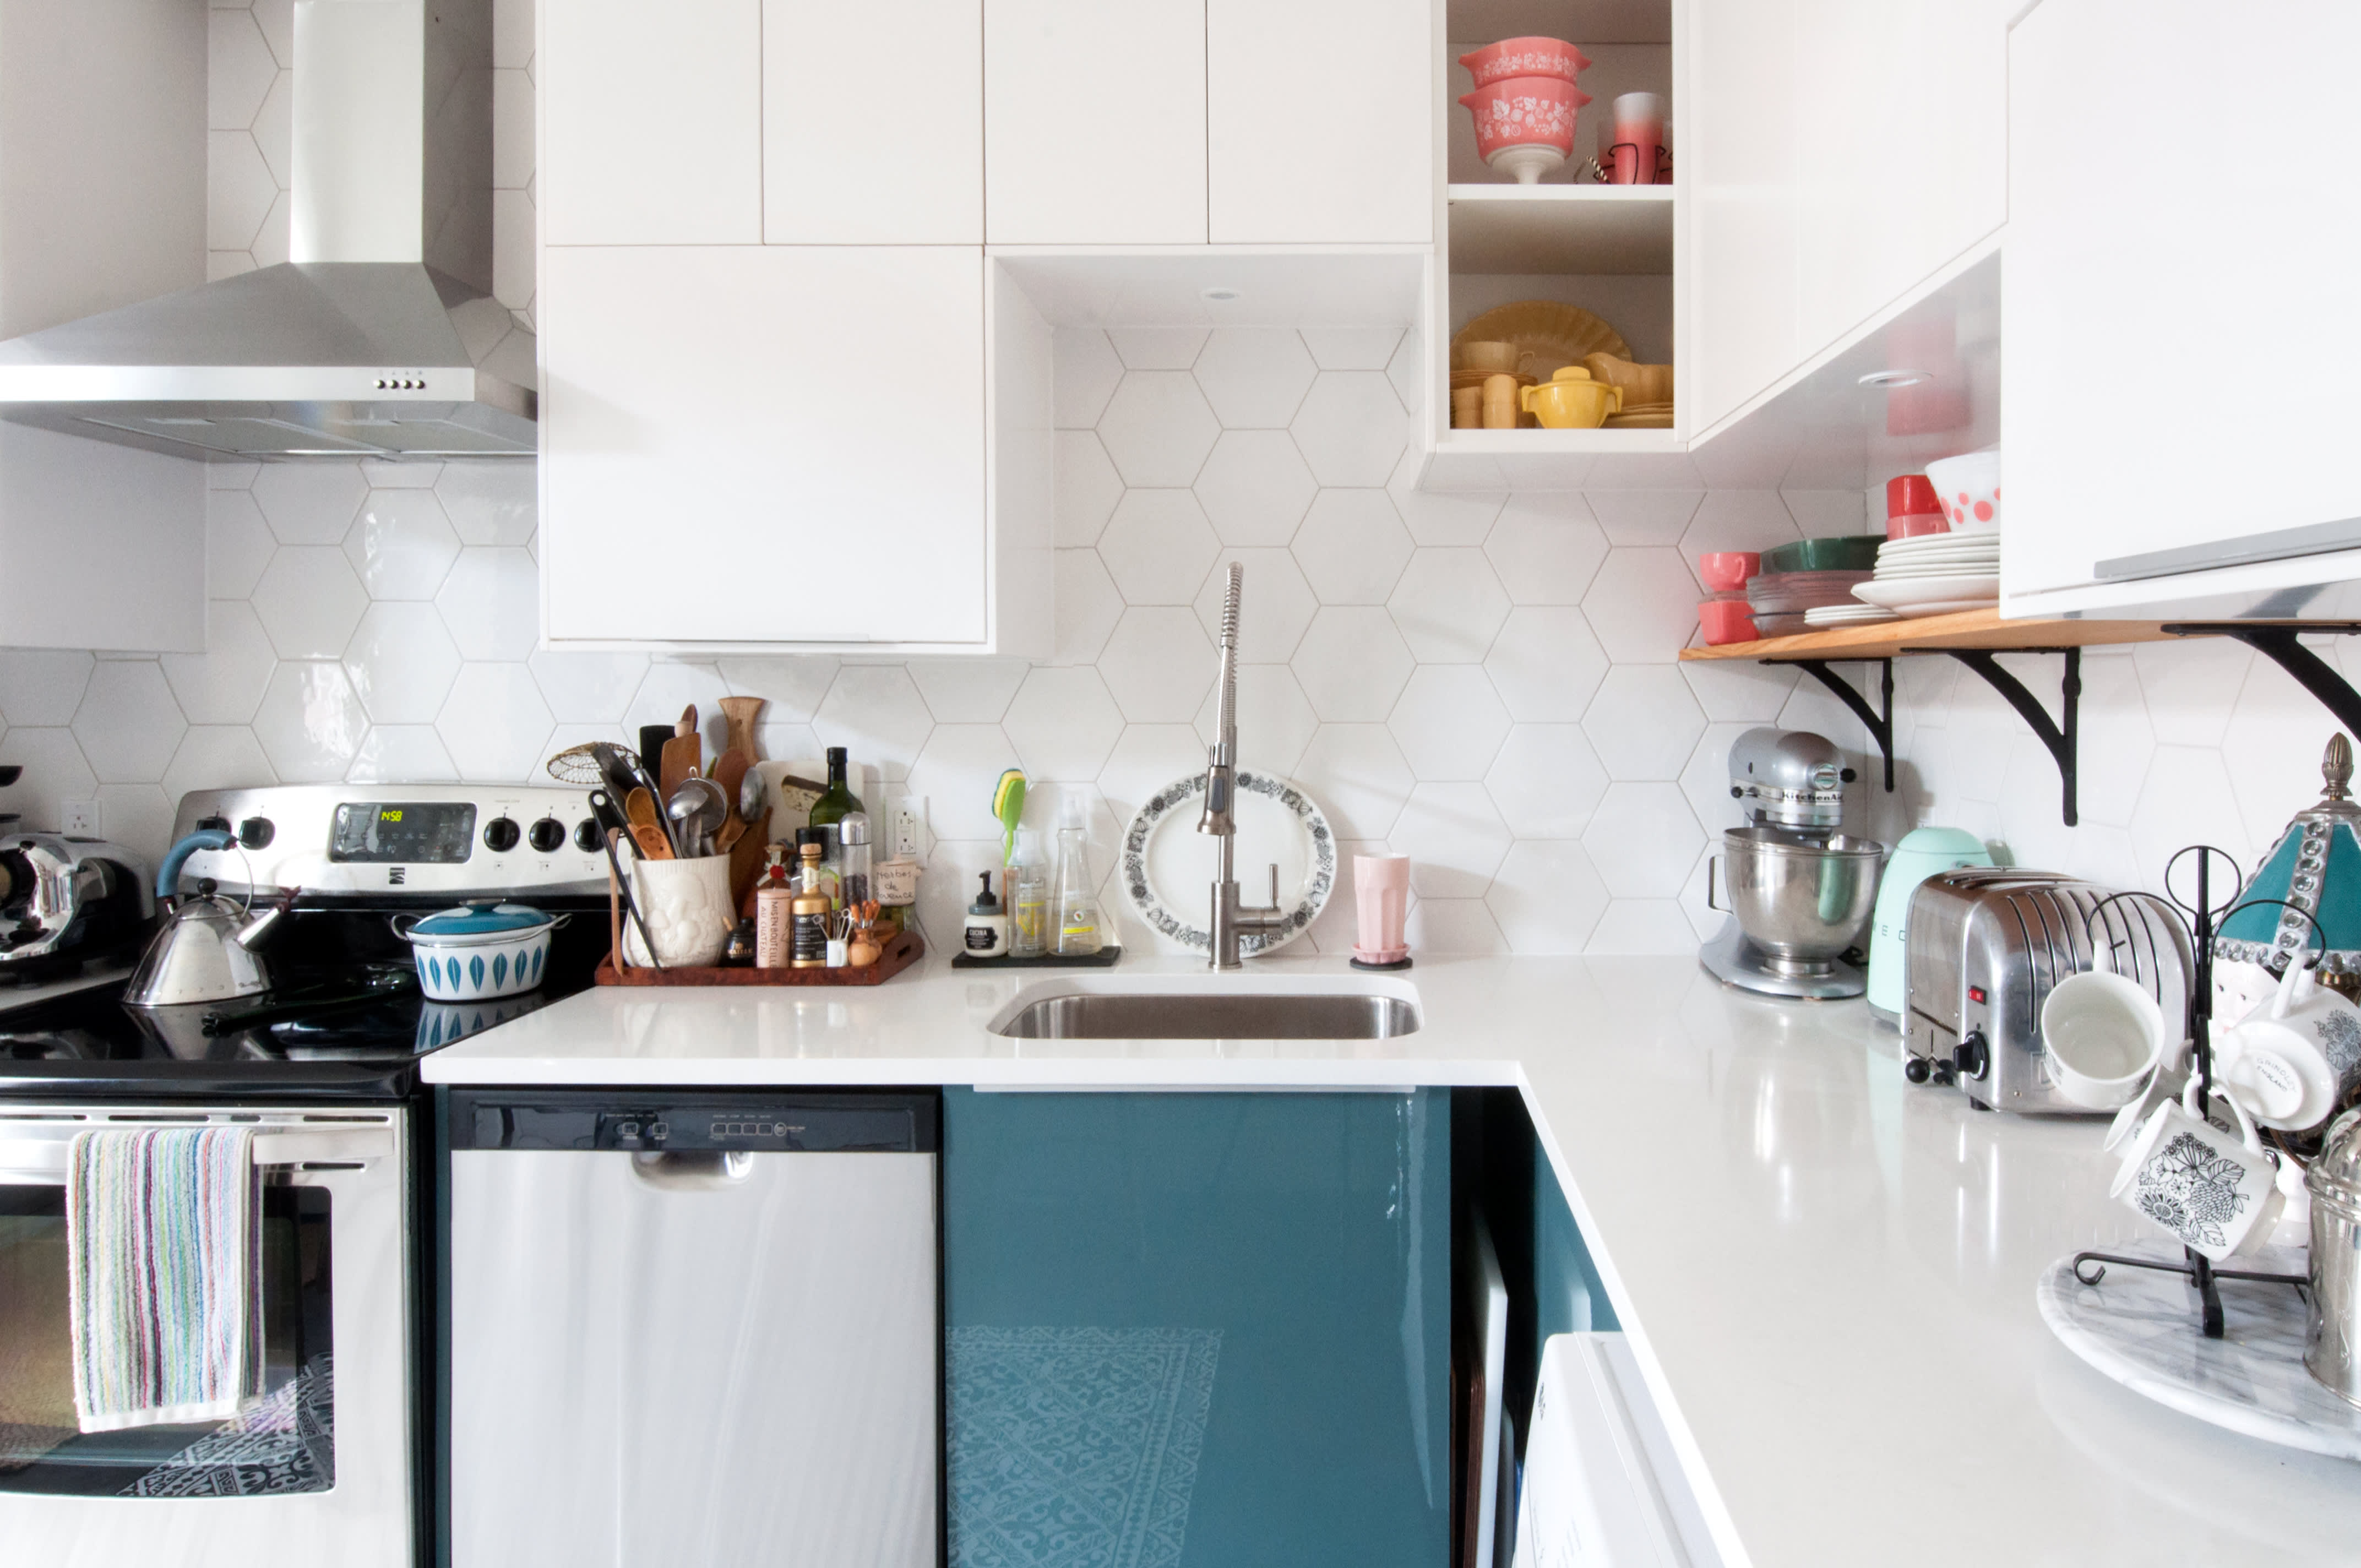 How to Choose A Small Dishwasher for Apartment